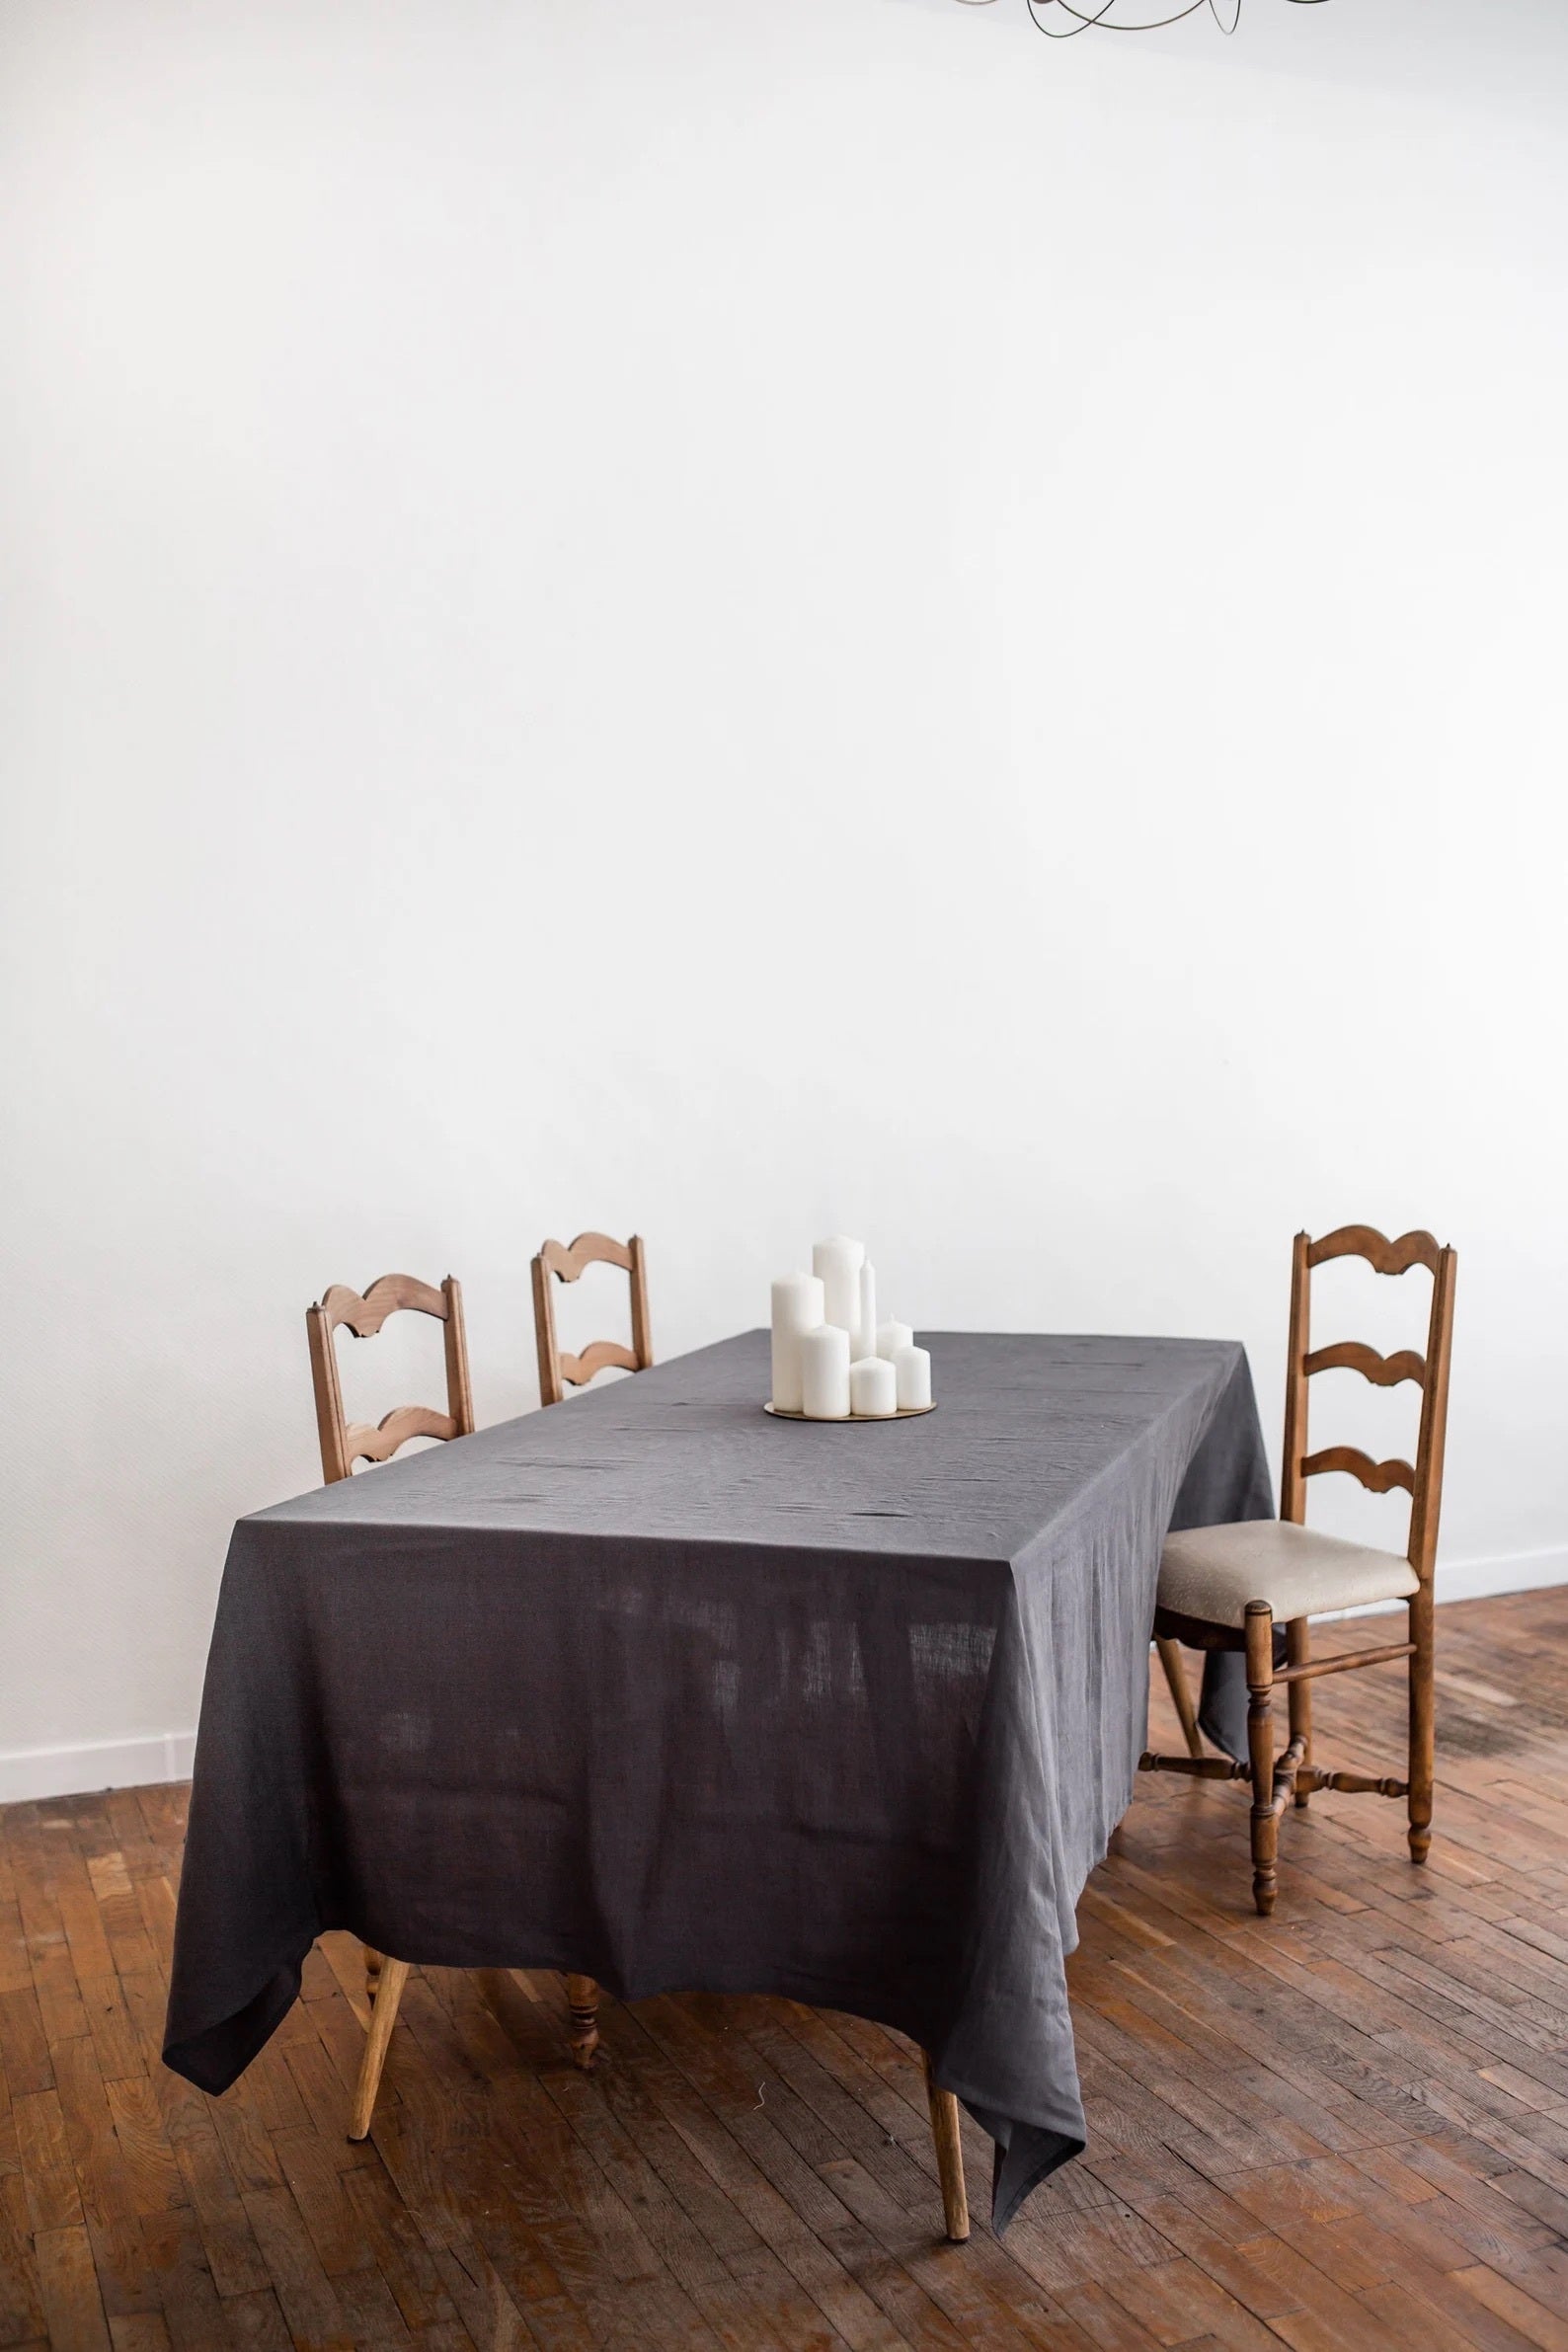 Dinner Table With Candles Placesd on Charcoal Linen Tablecloth By Amourlinen